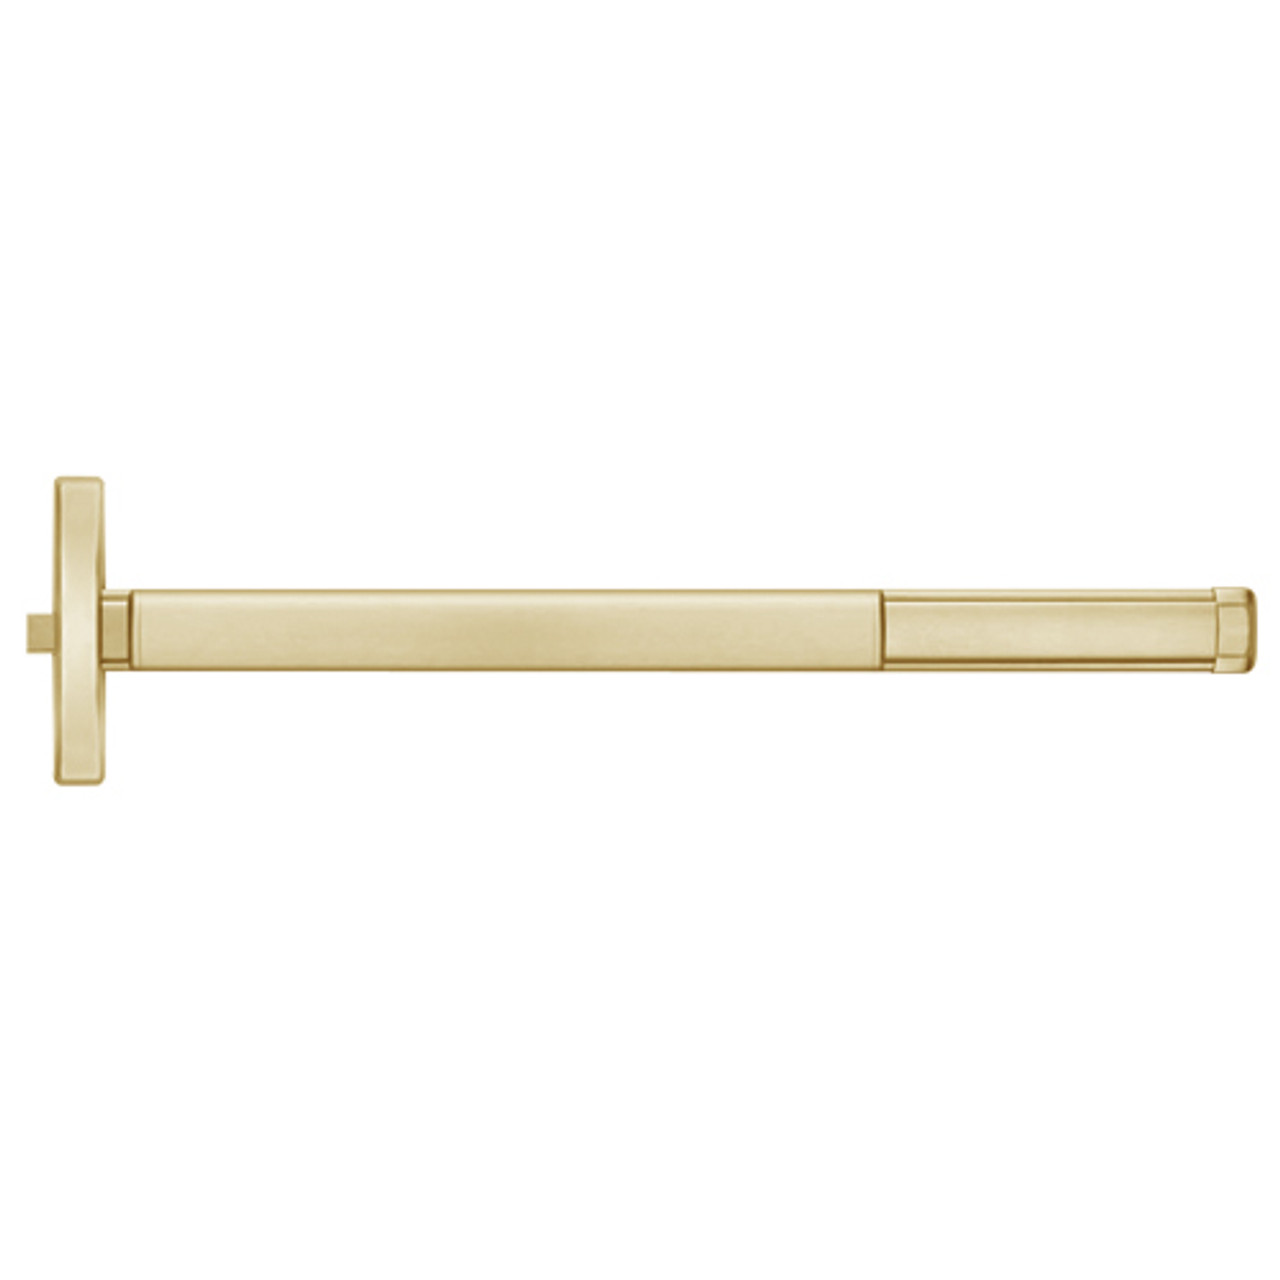 ELRFL2408-606-36 PHI 2400 Series Fire Rated Apex Rim Exit Device with Electric Latch Retraction Prepped for Key Controls Lever in Satin Brass Finish